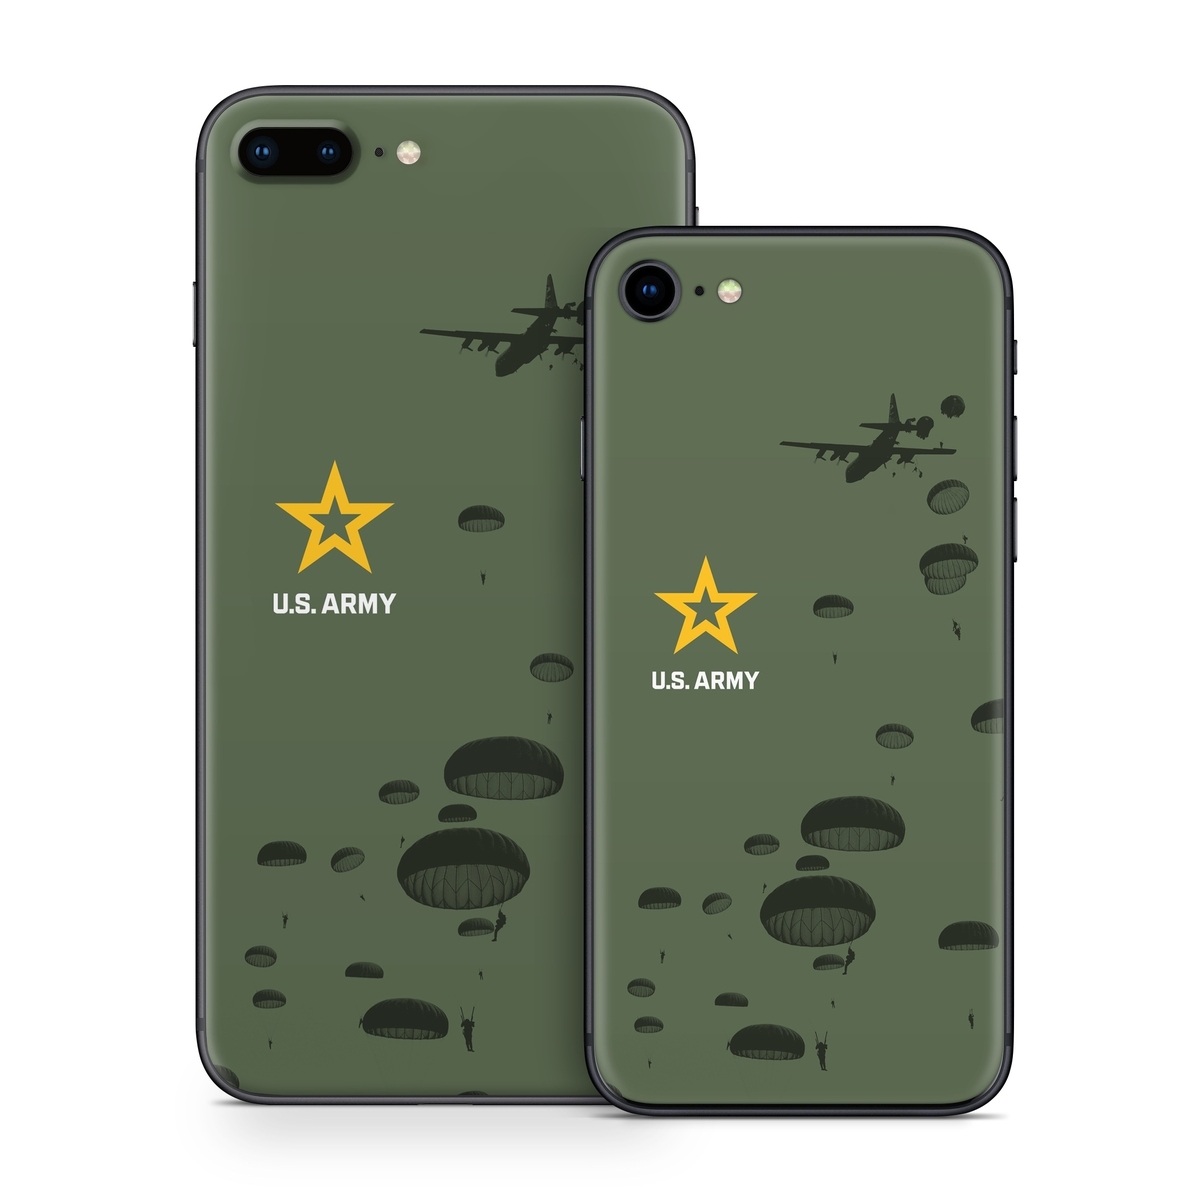 iPhone 8 Series Skin design of Text, Organism, Design, Paratrooper, Pattern, Font, Illustration, Art, with black colors